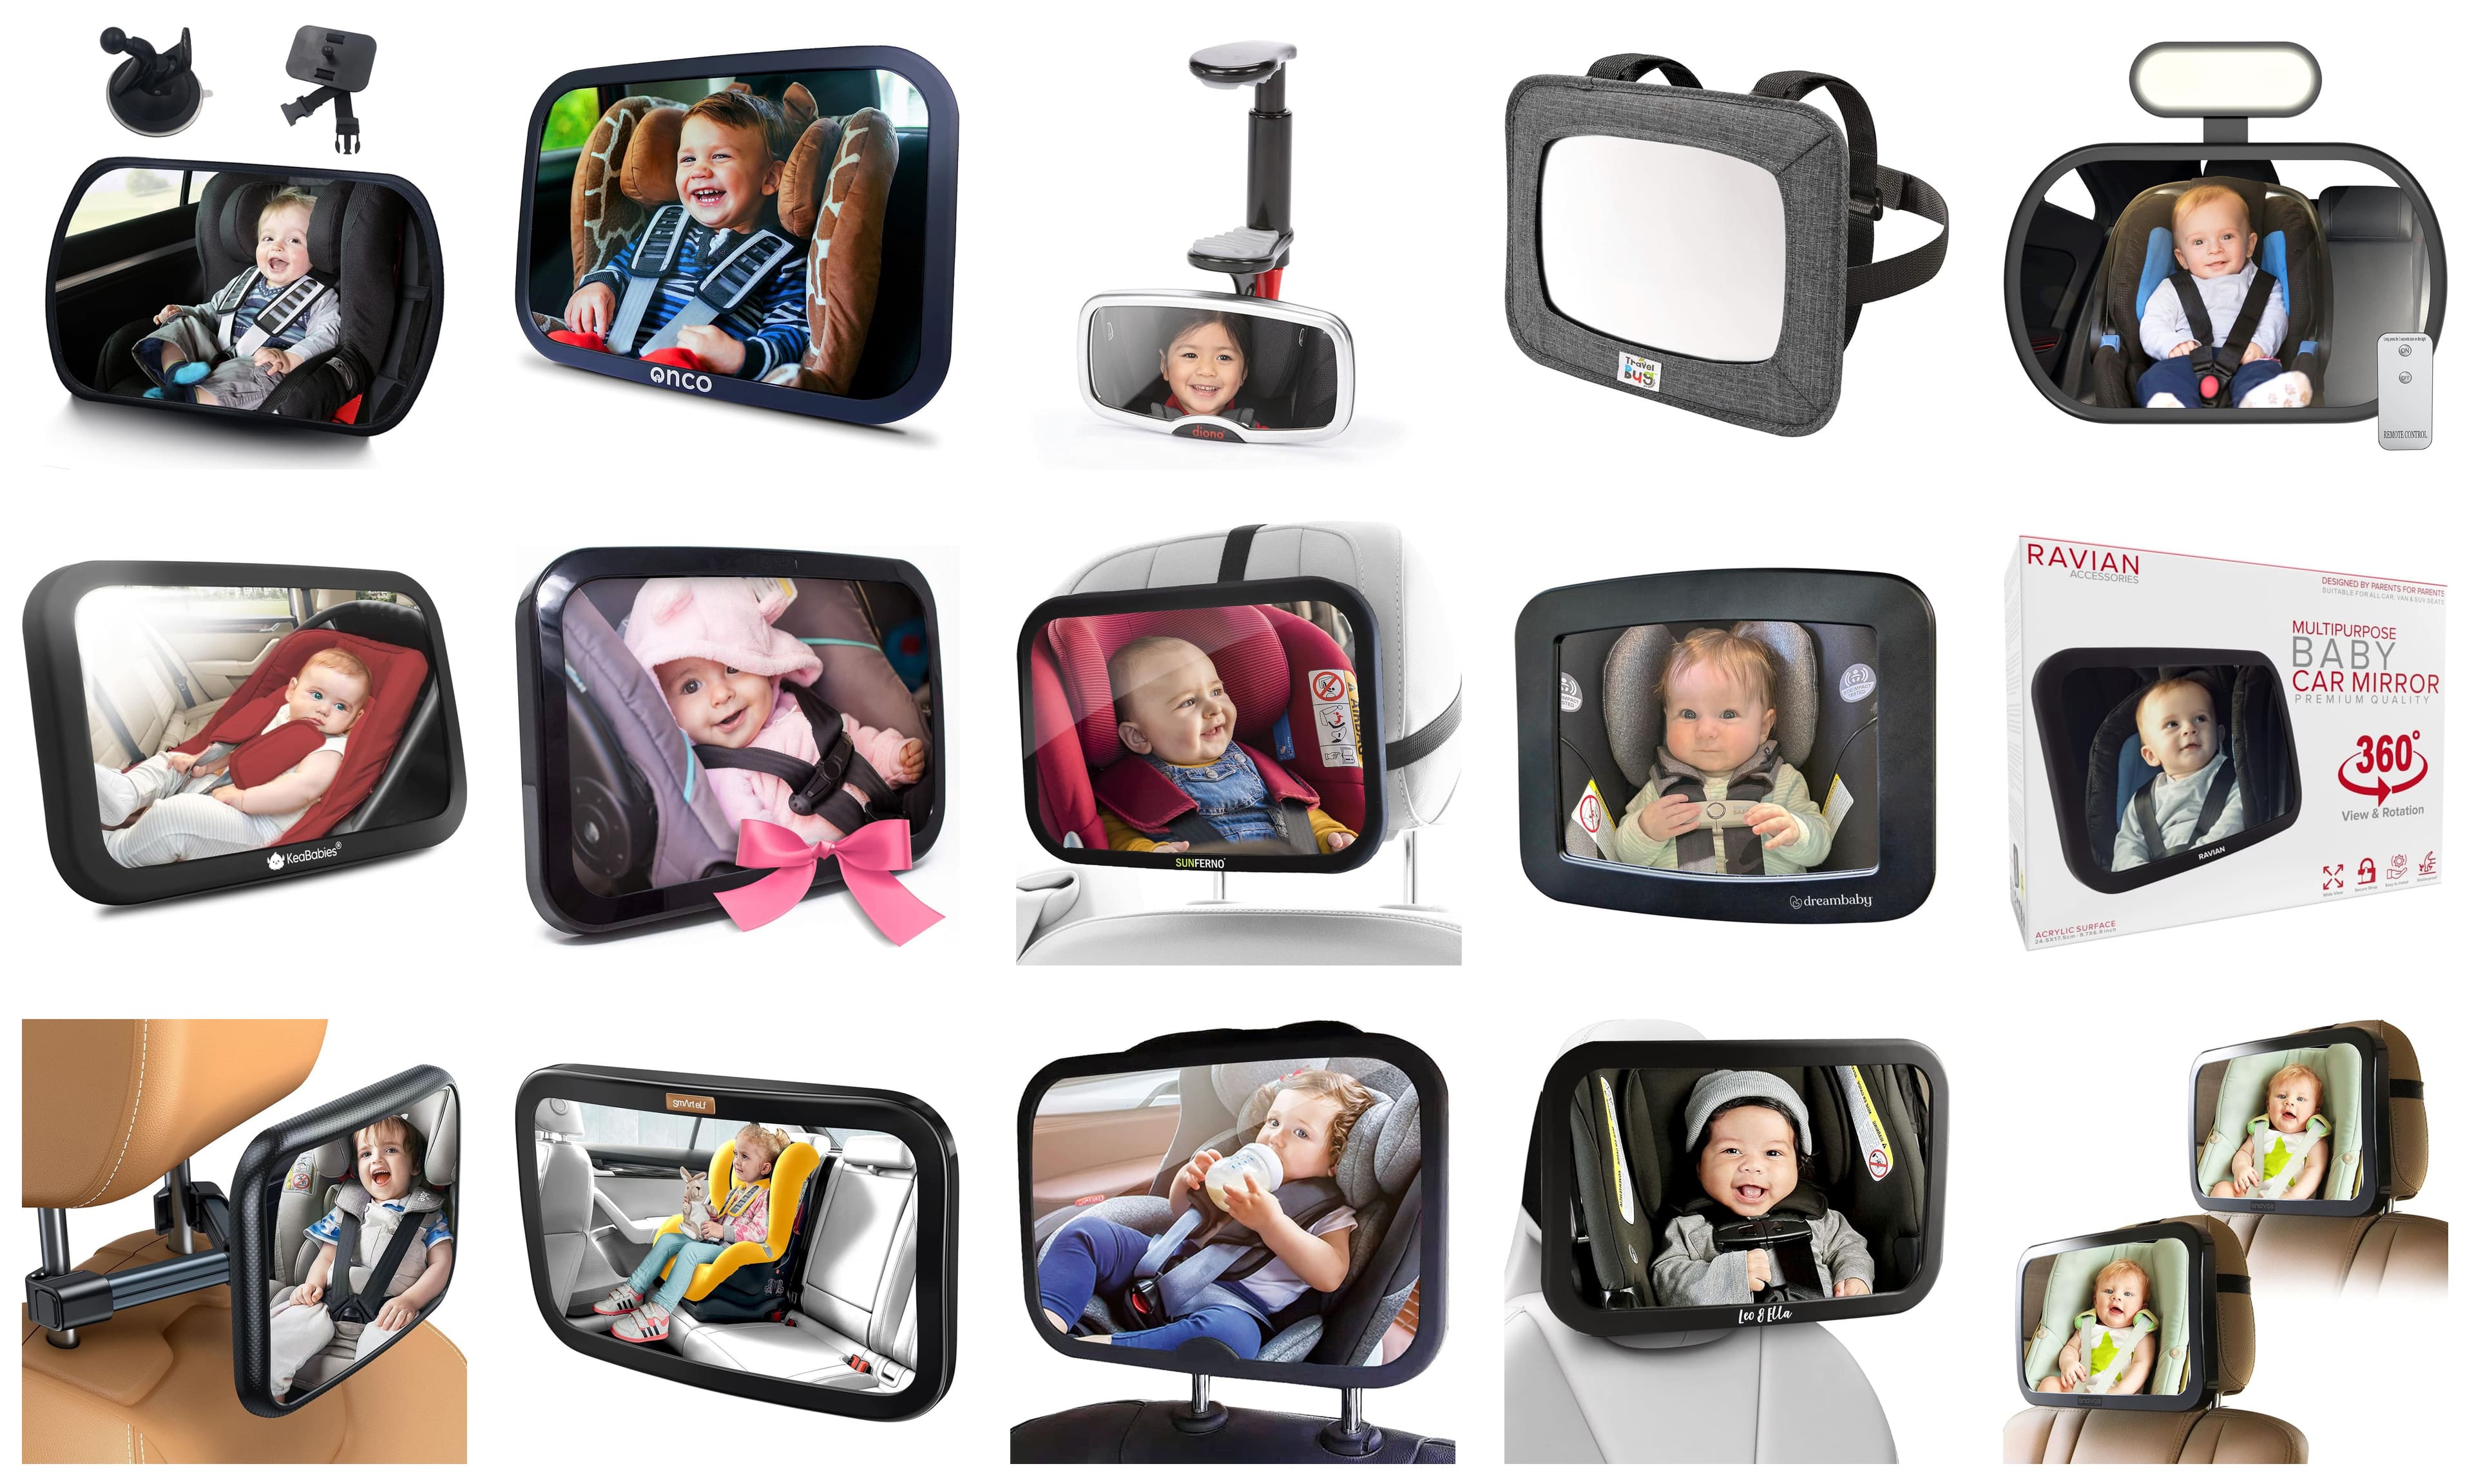 Smart eLf Baby Car Mirror, Large Safety Car Seat Mirror for Rear Facing  Infant Child with Wide Crystal Clear View, Shatterproof & Secure, Crash  Tested